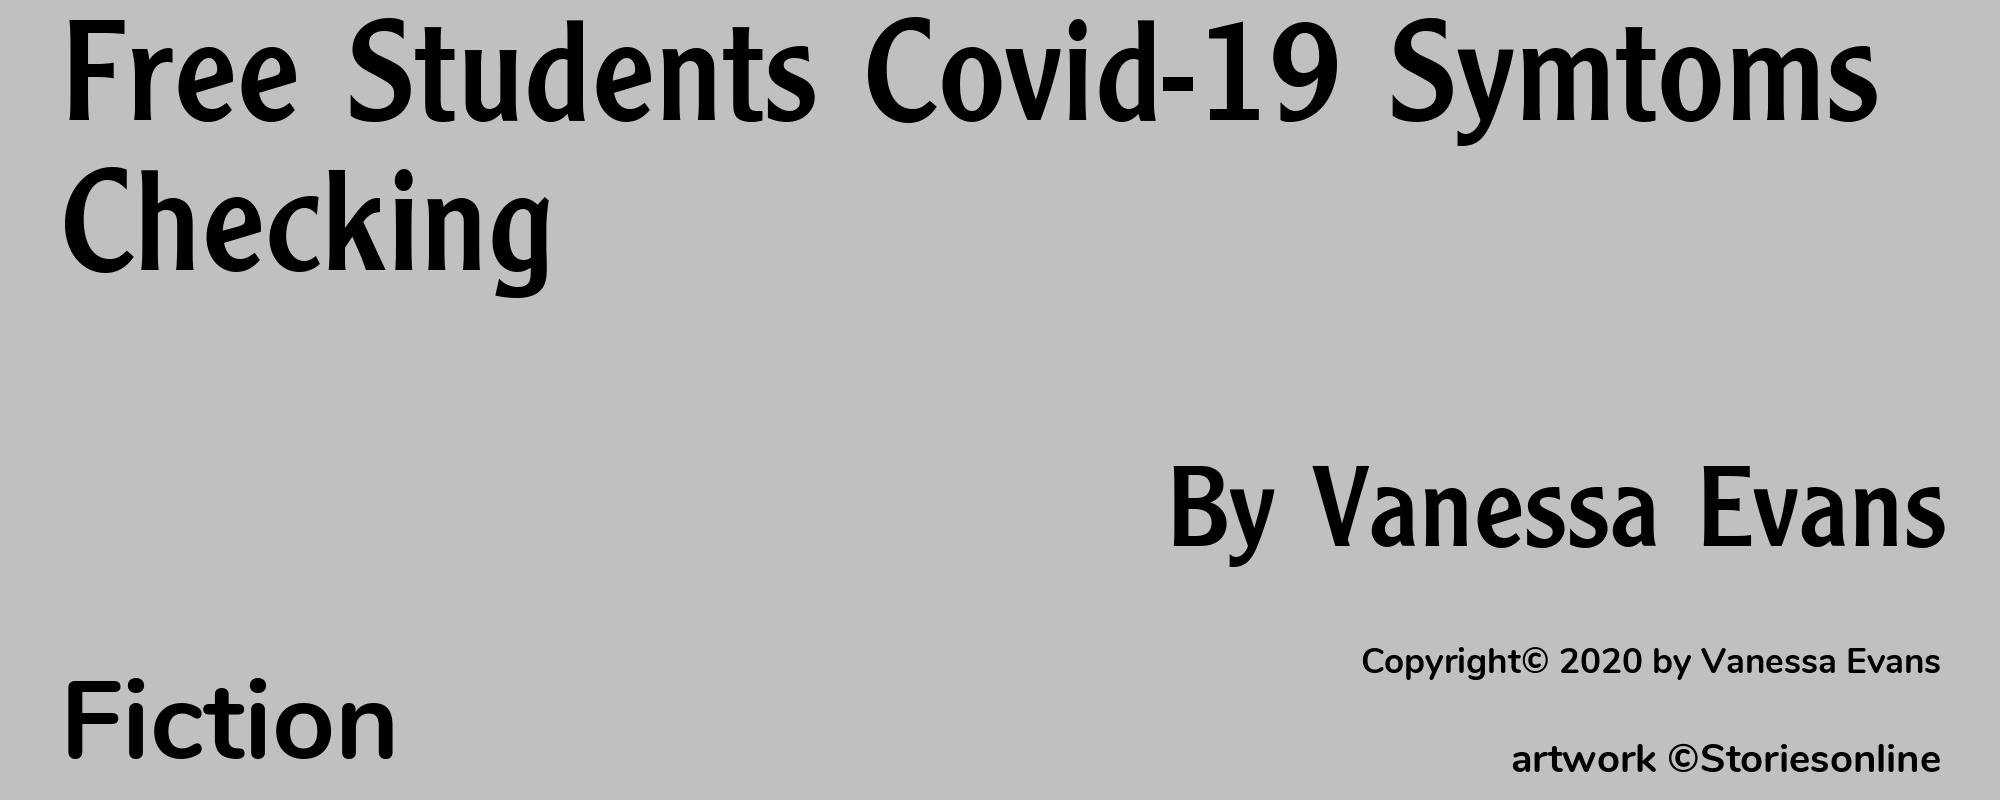 Free Students Covid-19 Symtoms Checking - Cover